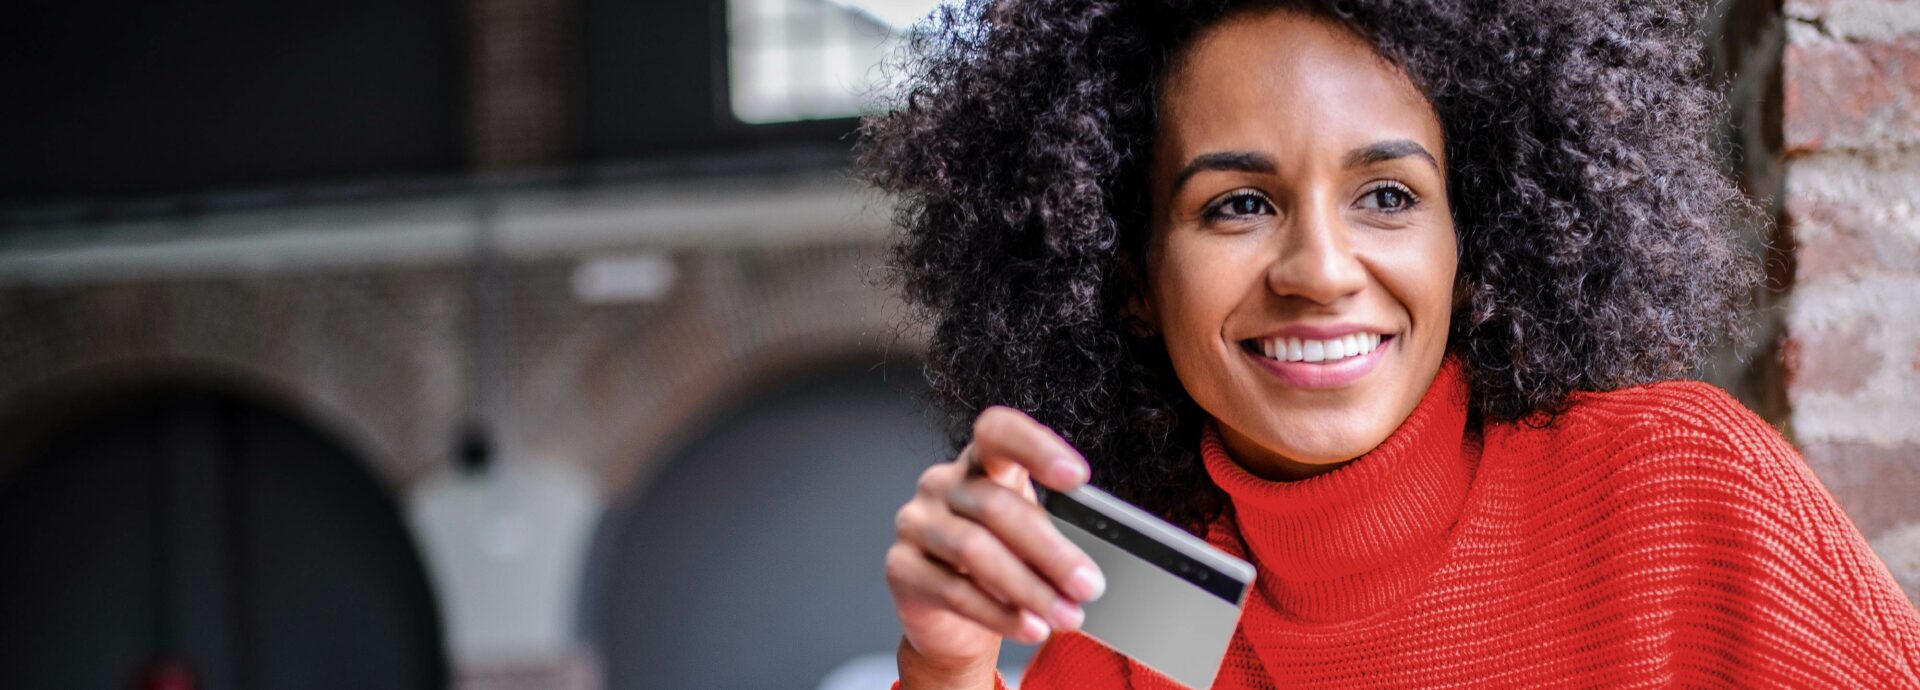 Woman sitting down smiling with credit card and tablet in hand